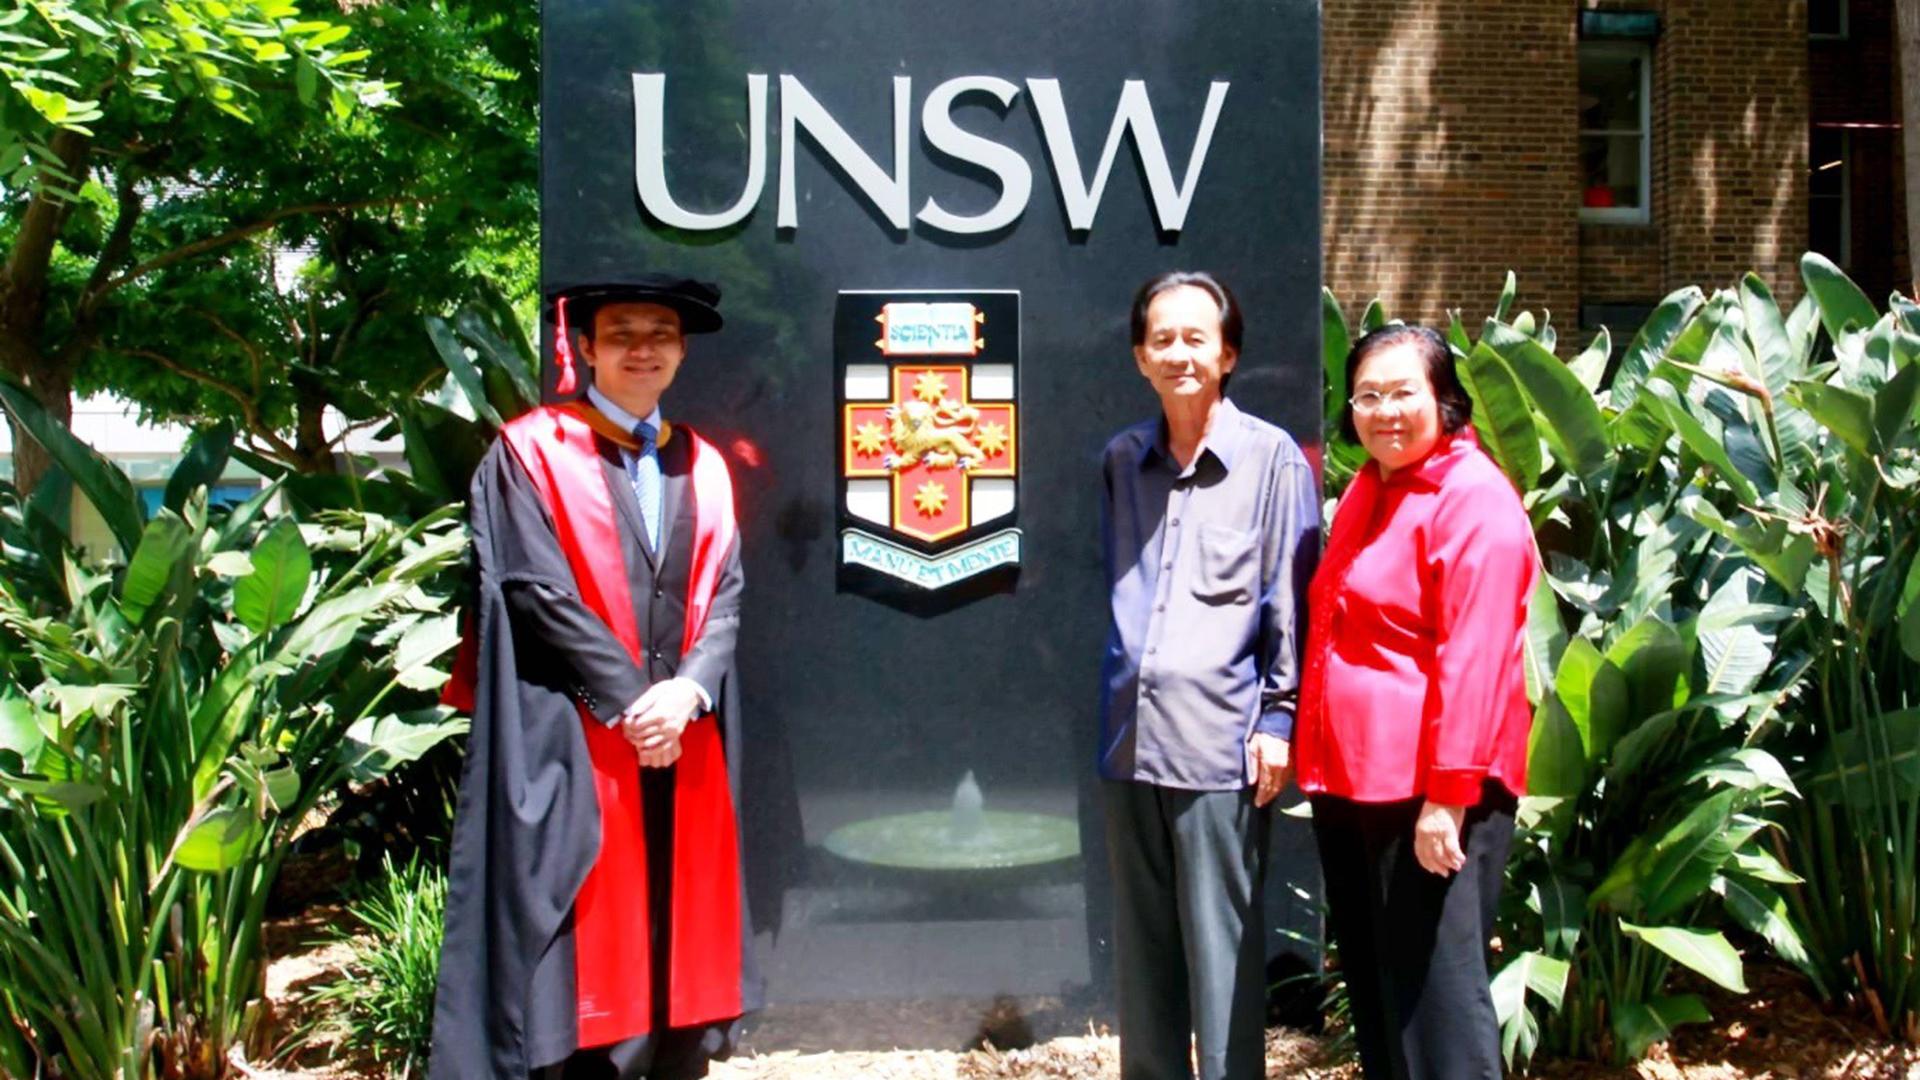 SeniorEngineer Dr Lai Kai Xian (left) with his parents (right) at the 2010 University of New South Wales graduation ceremony. He was awarded a Doctor of Philosophy in Electrical Engineering.